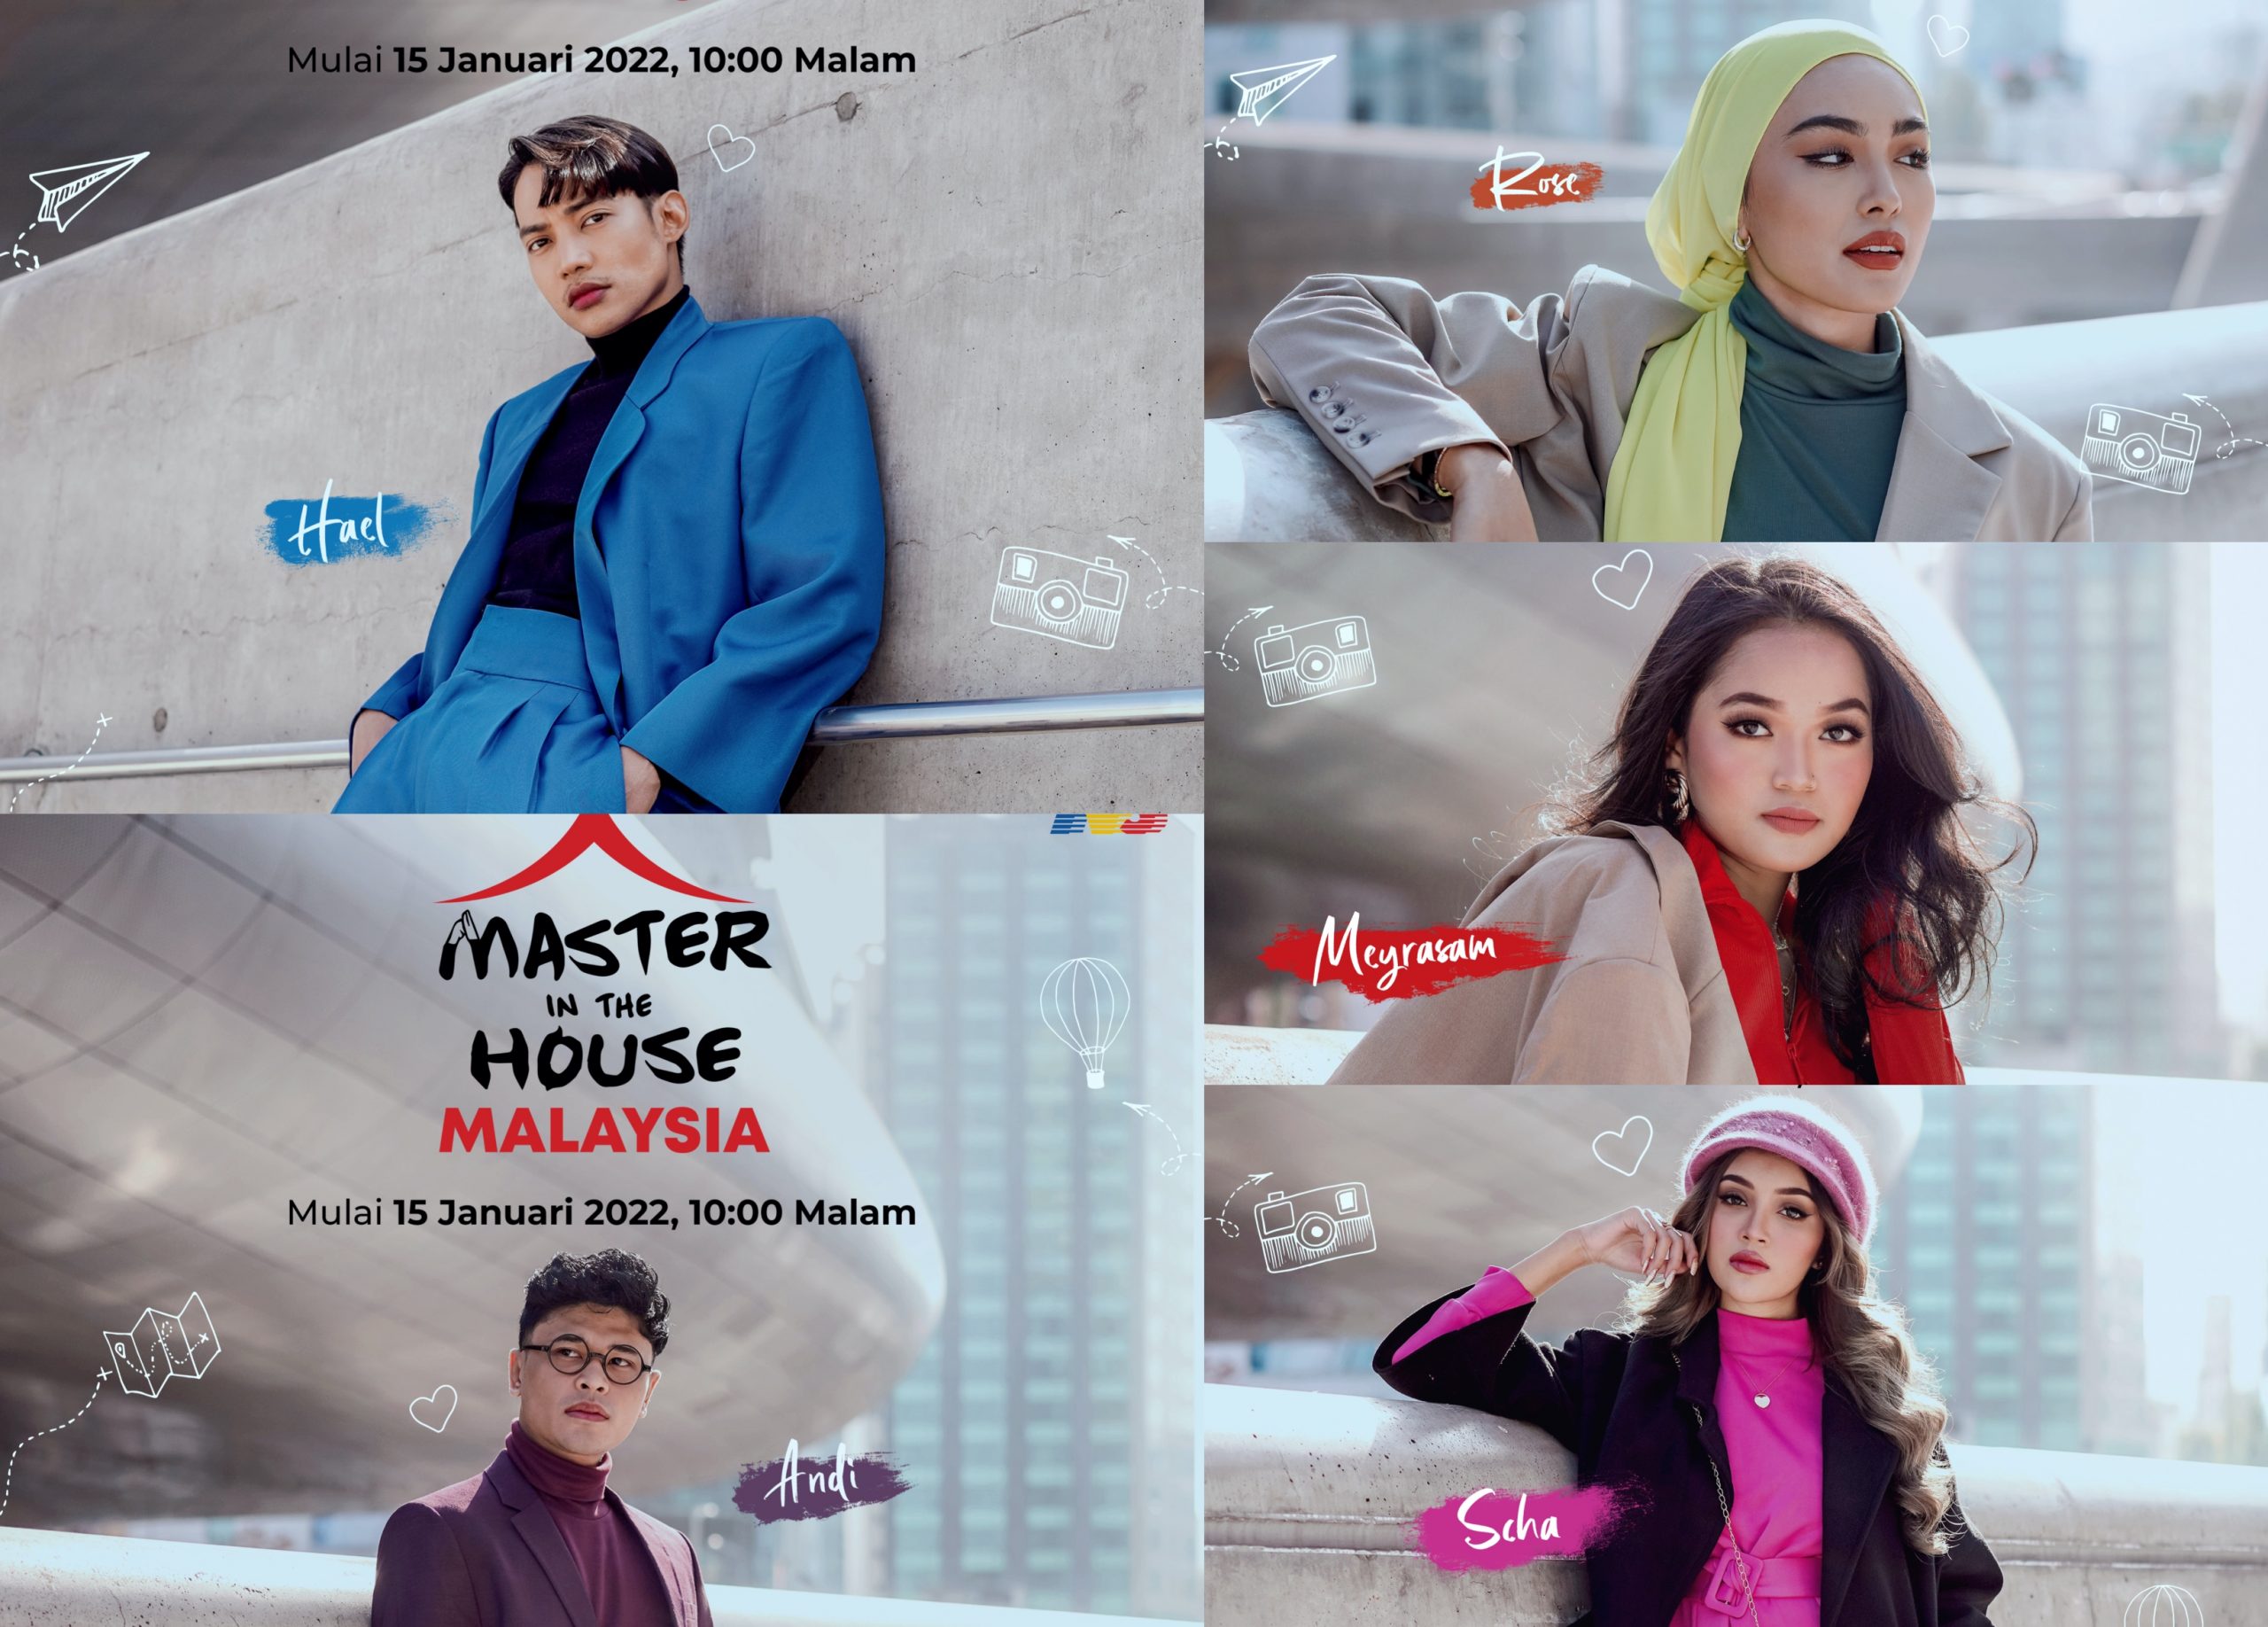 Master in the house malaysia episode 1